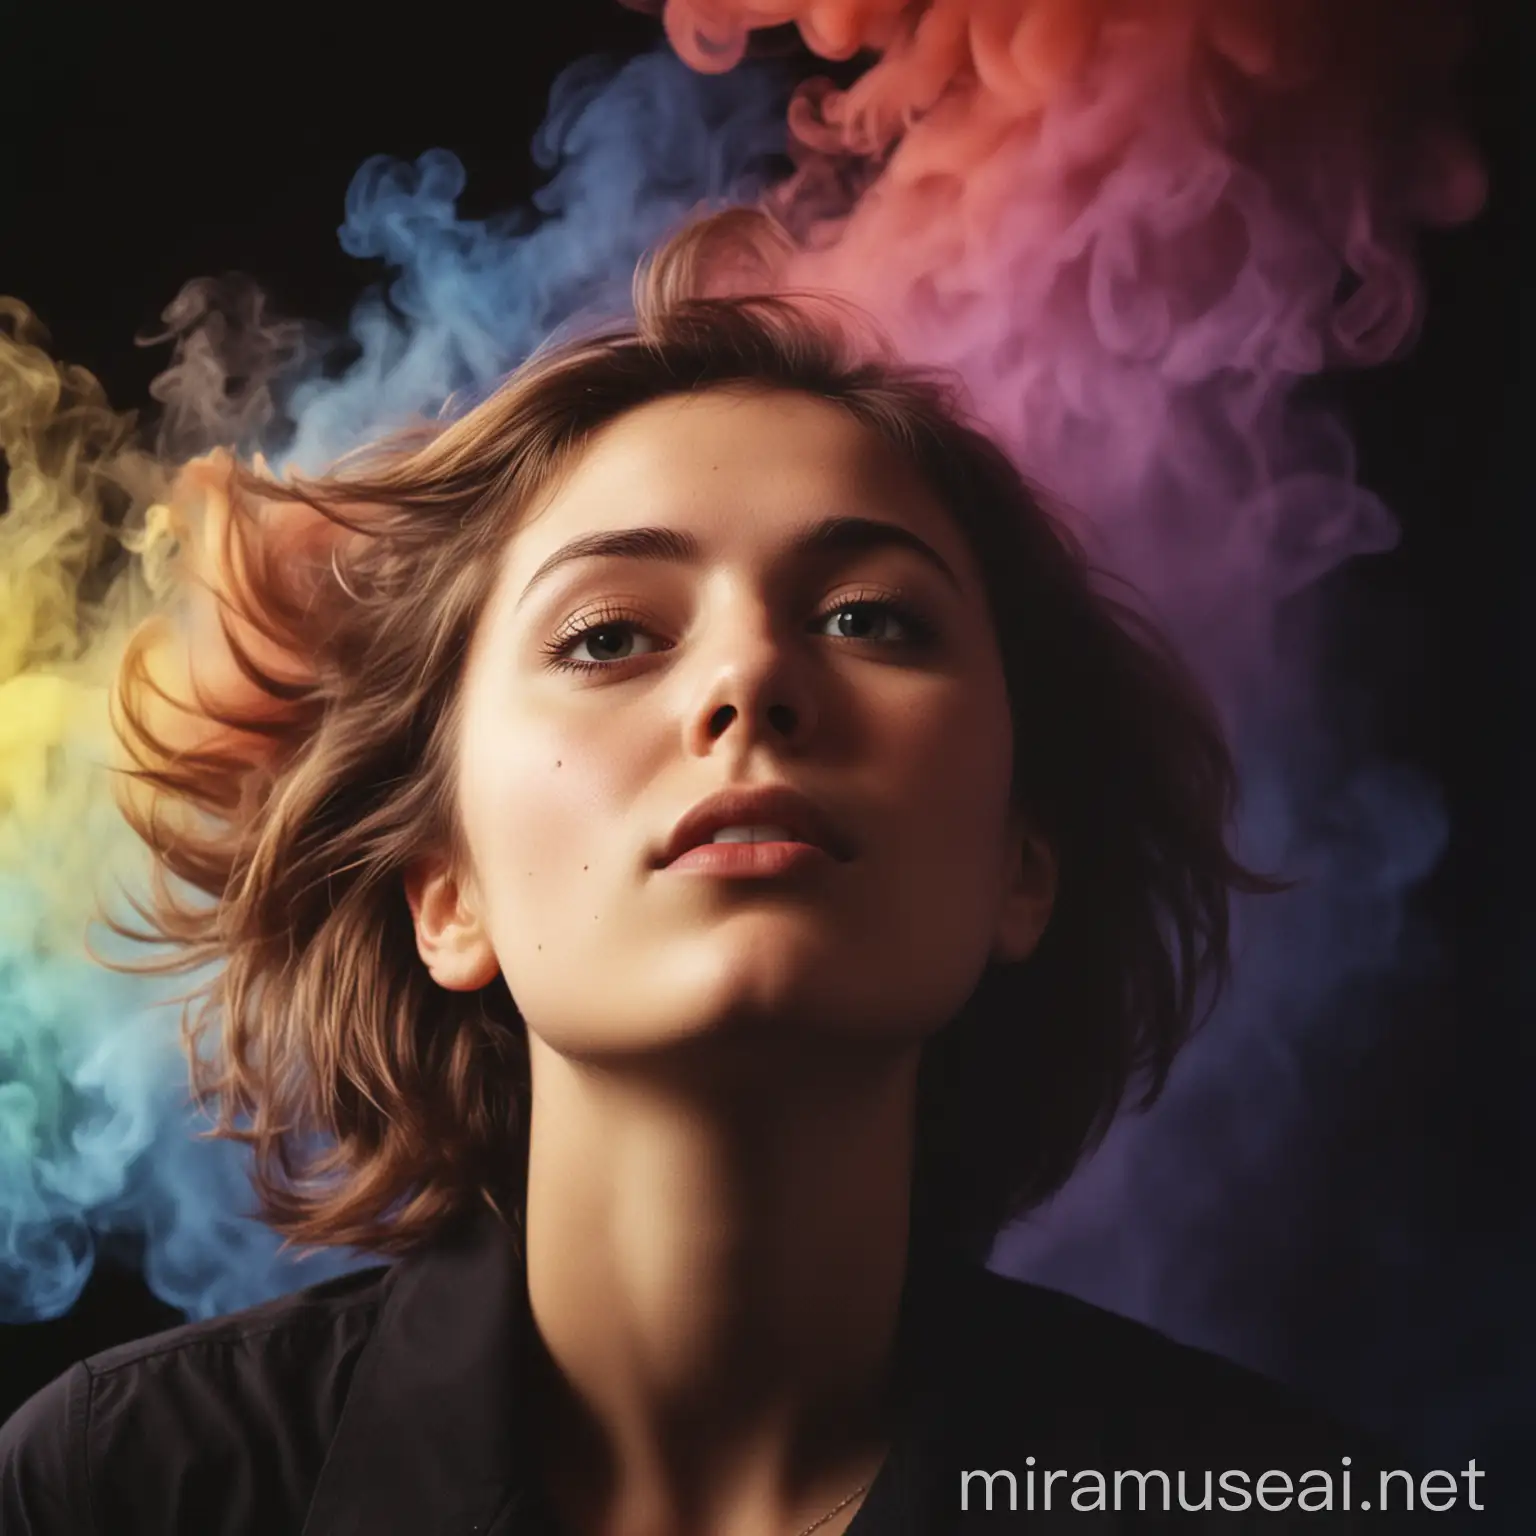 three-quarter portrait headshot of young woman looking up. She looks like she’s thinking and wondering what’s above her. The background is black with colorful smoke rising behind her. The style is Kodak gold in noir, dark.